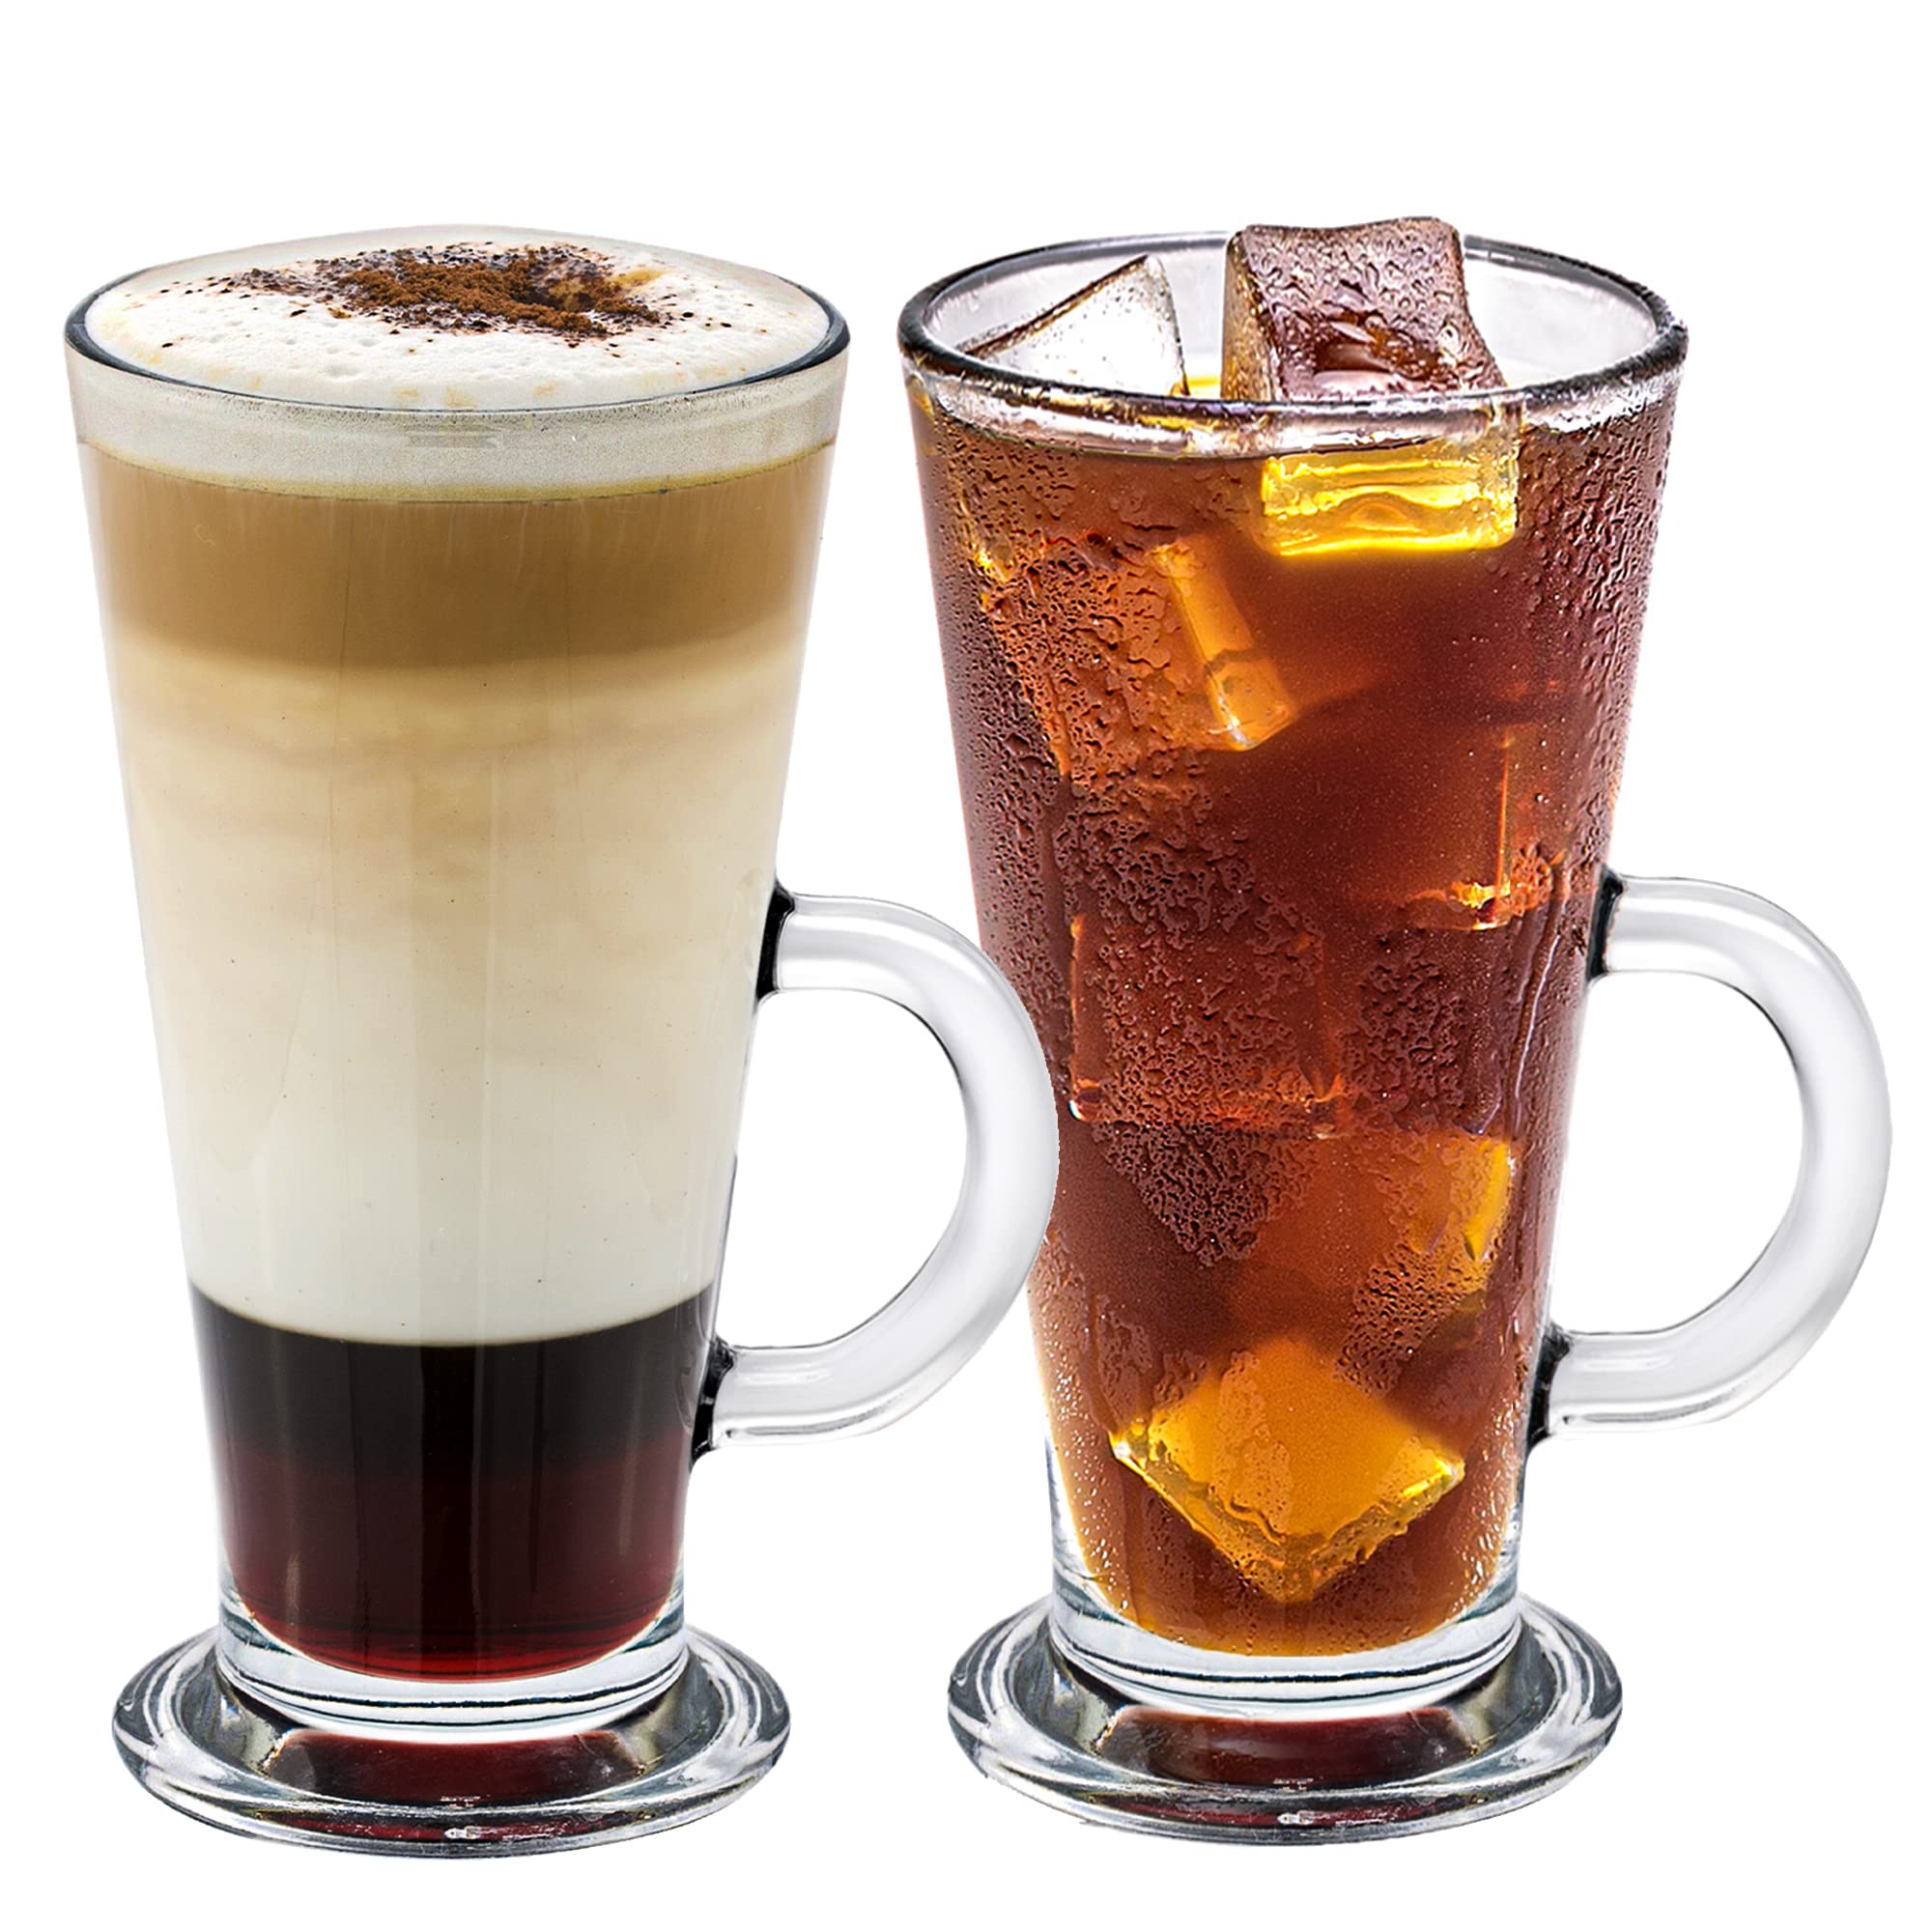 Crystalia Tall Irish Coffee Mugs with Handle, Large Colombian Glasses Set of 2, Tall Funnel Clear Glasses for Iced Coffee, Latte, Cappuccino, and Hot Chocolate, Big Plain Glasses (Large 12 oz)